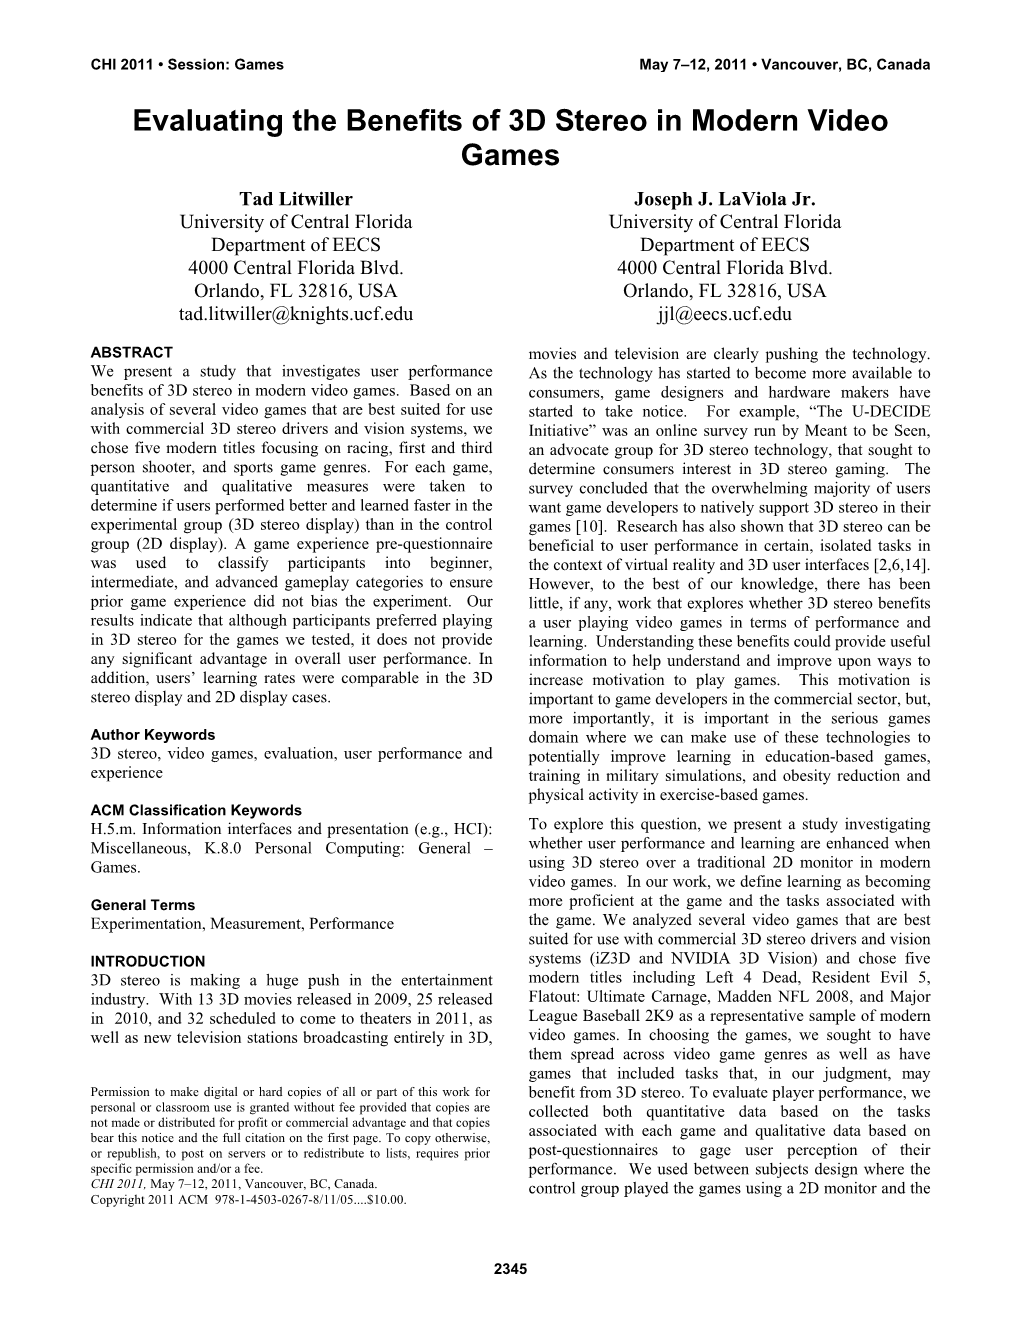 Evaluating the Benefits of 3D Stereo in Modern Video Games Tad Litwiller Joseph J